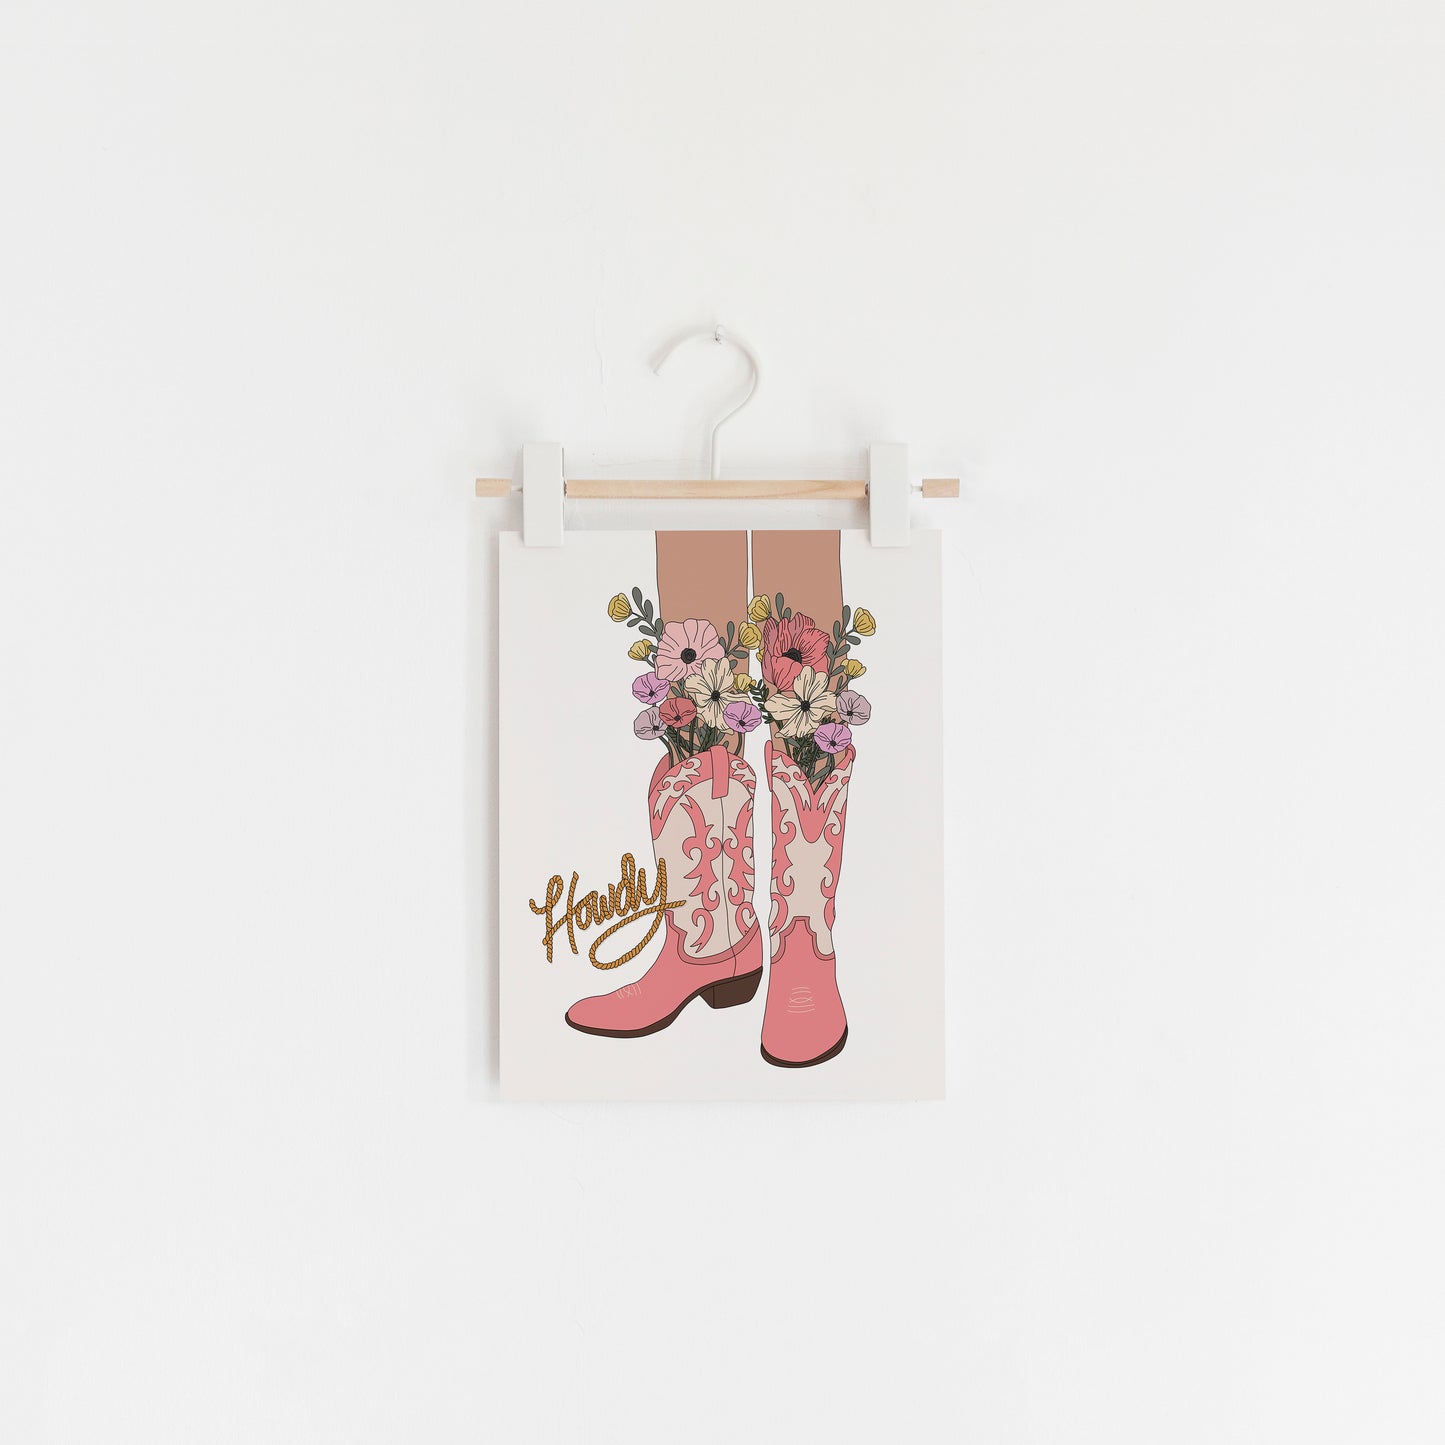 Howdy Cowboy Boots Art Print (11x14 inches)